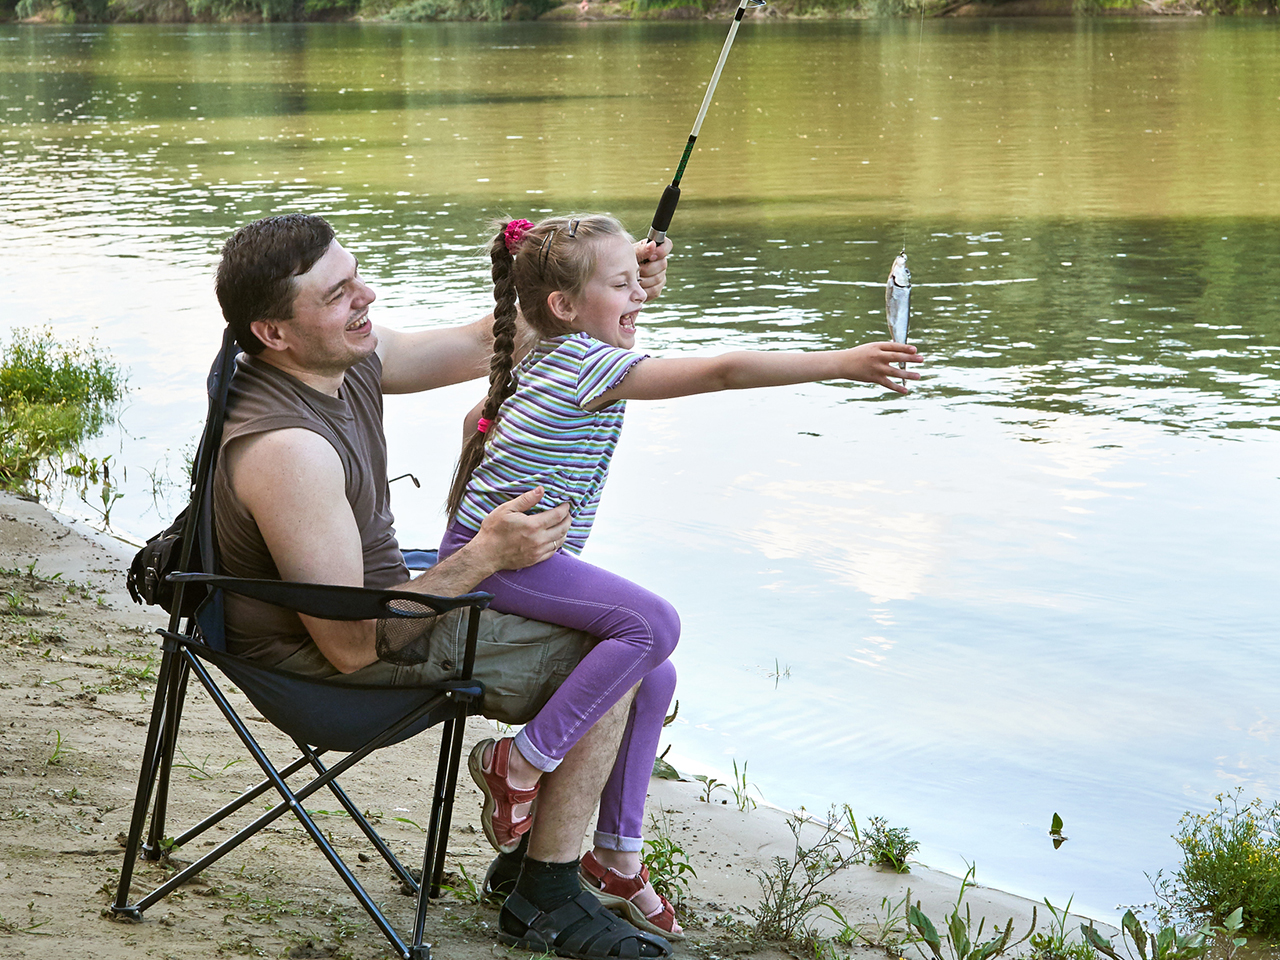 Dad and daughter laughing after catching a fish